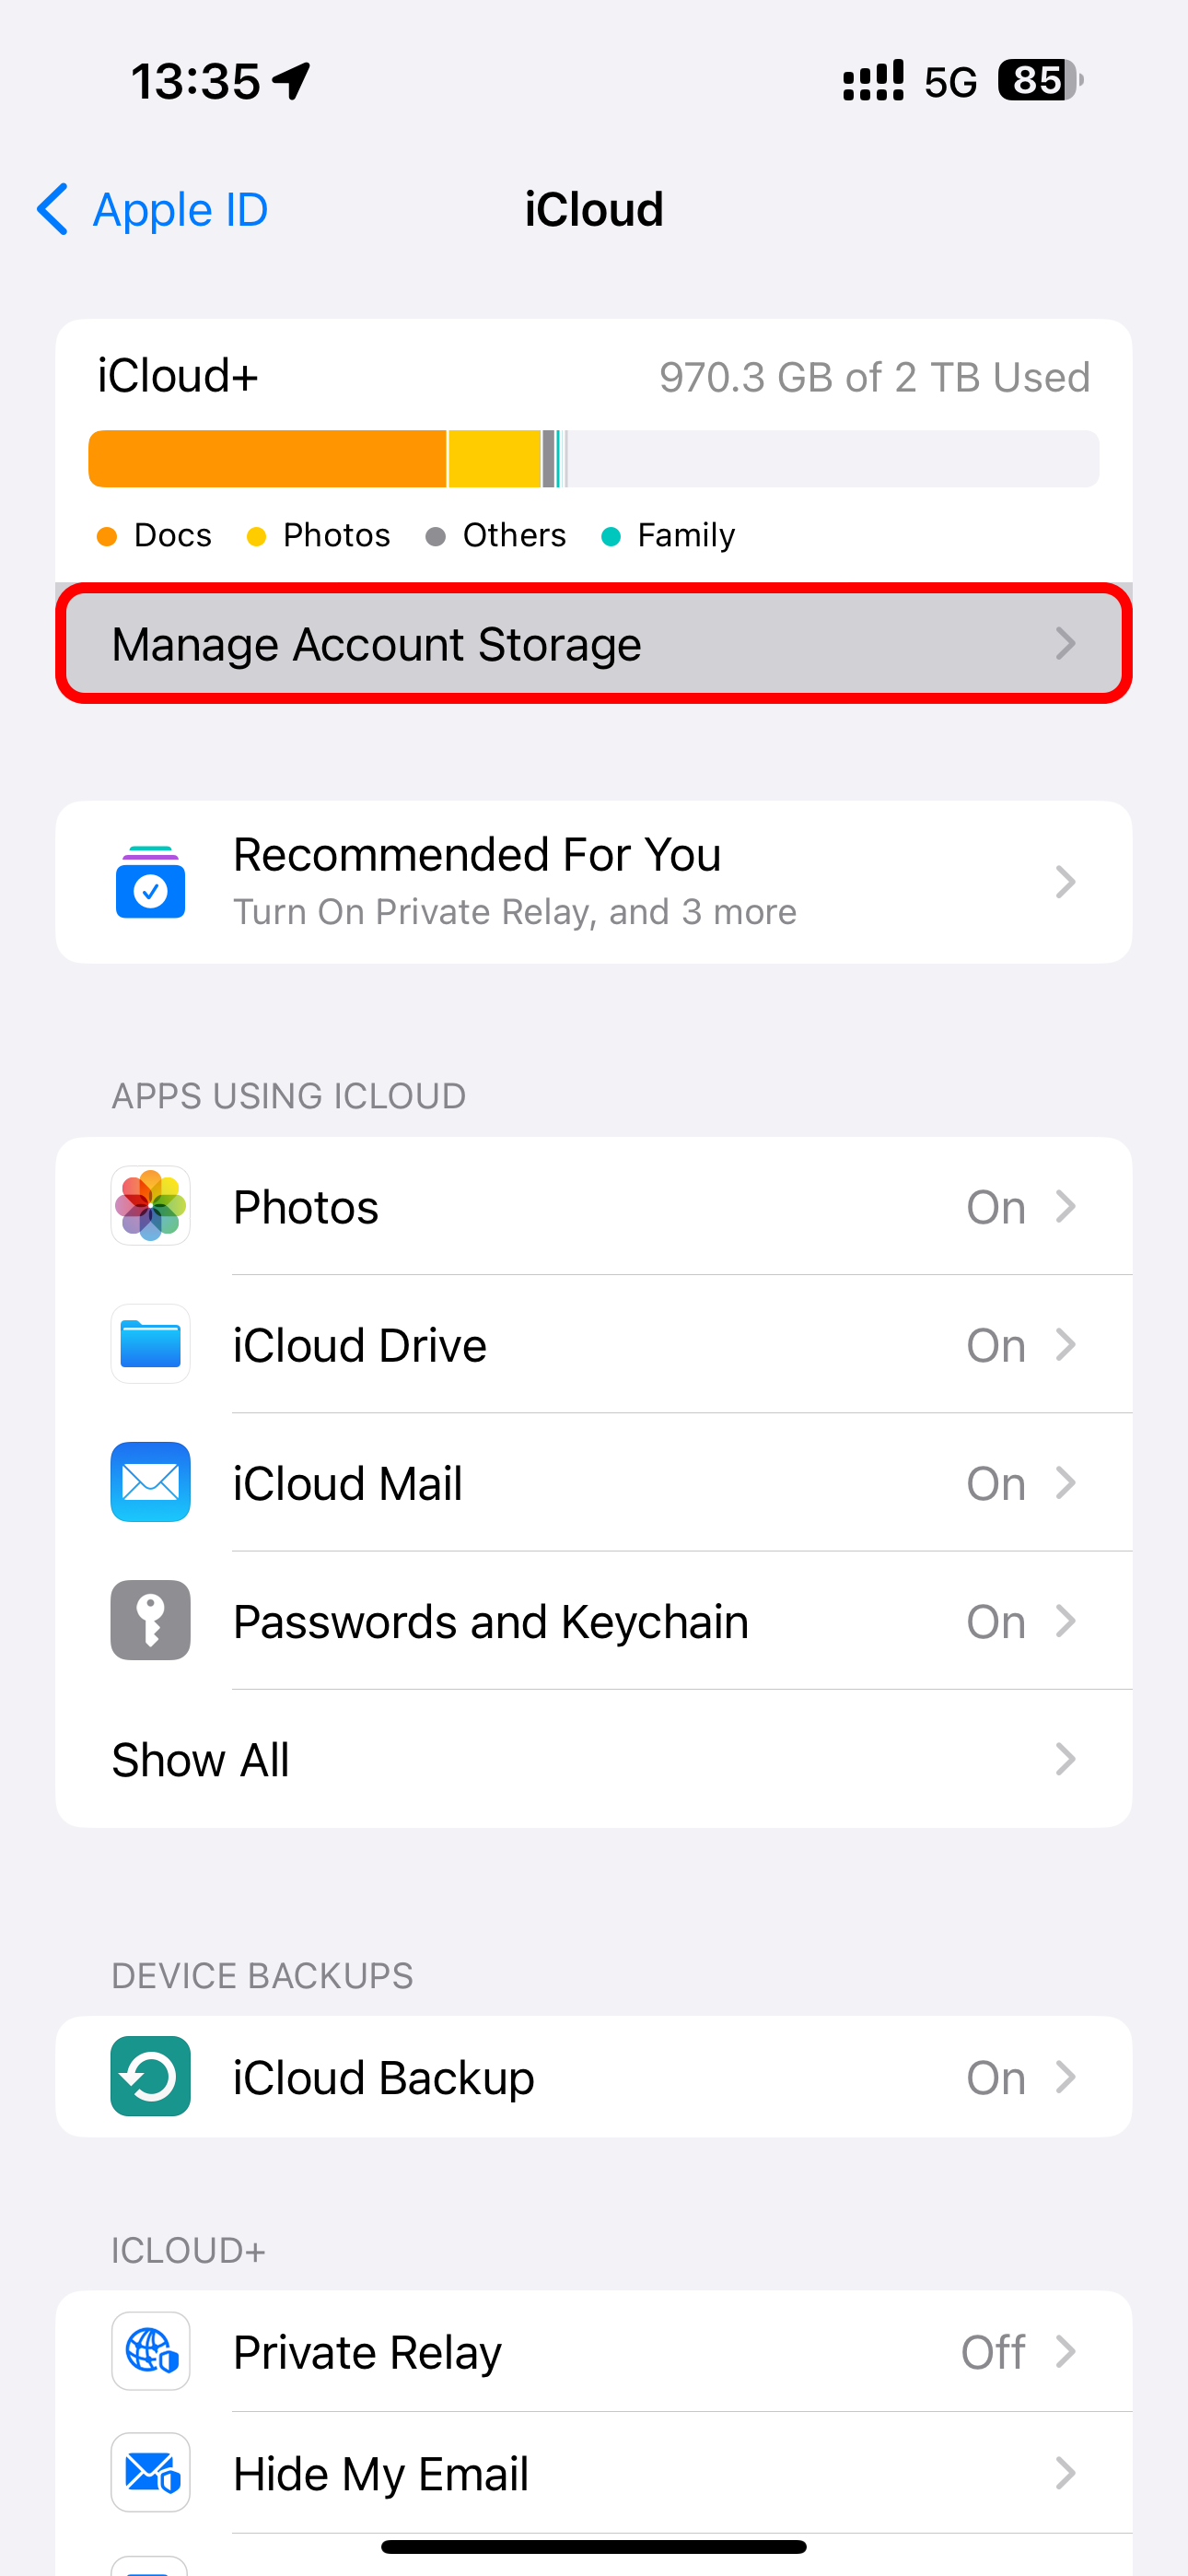 The iPhone's Settings app showing the iCloud section with the Manage Account Storage option selected.